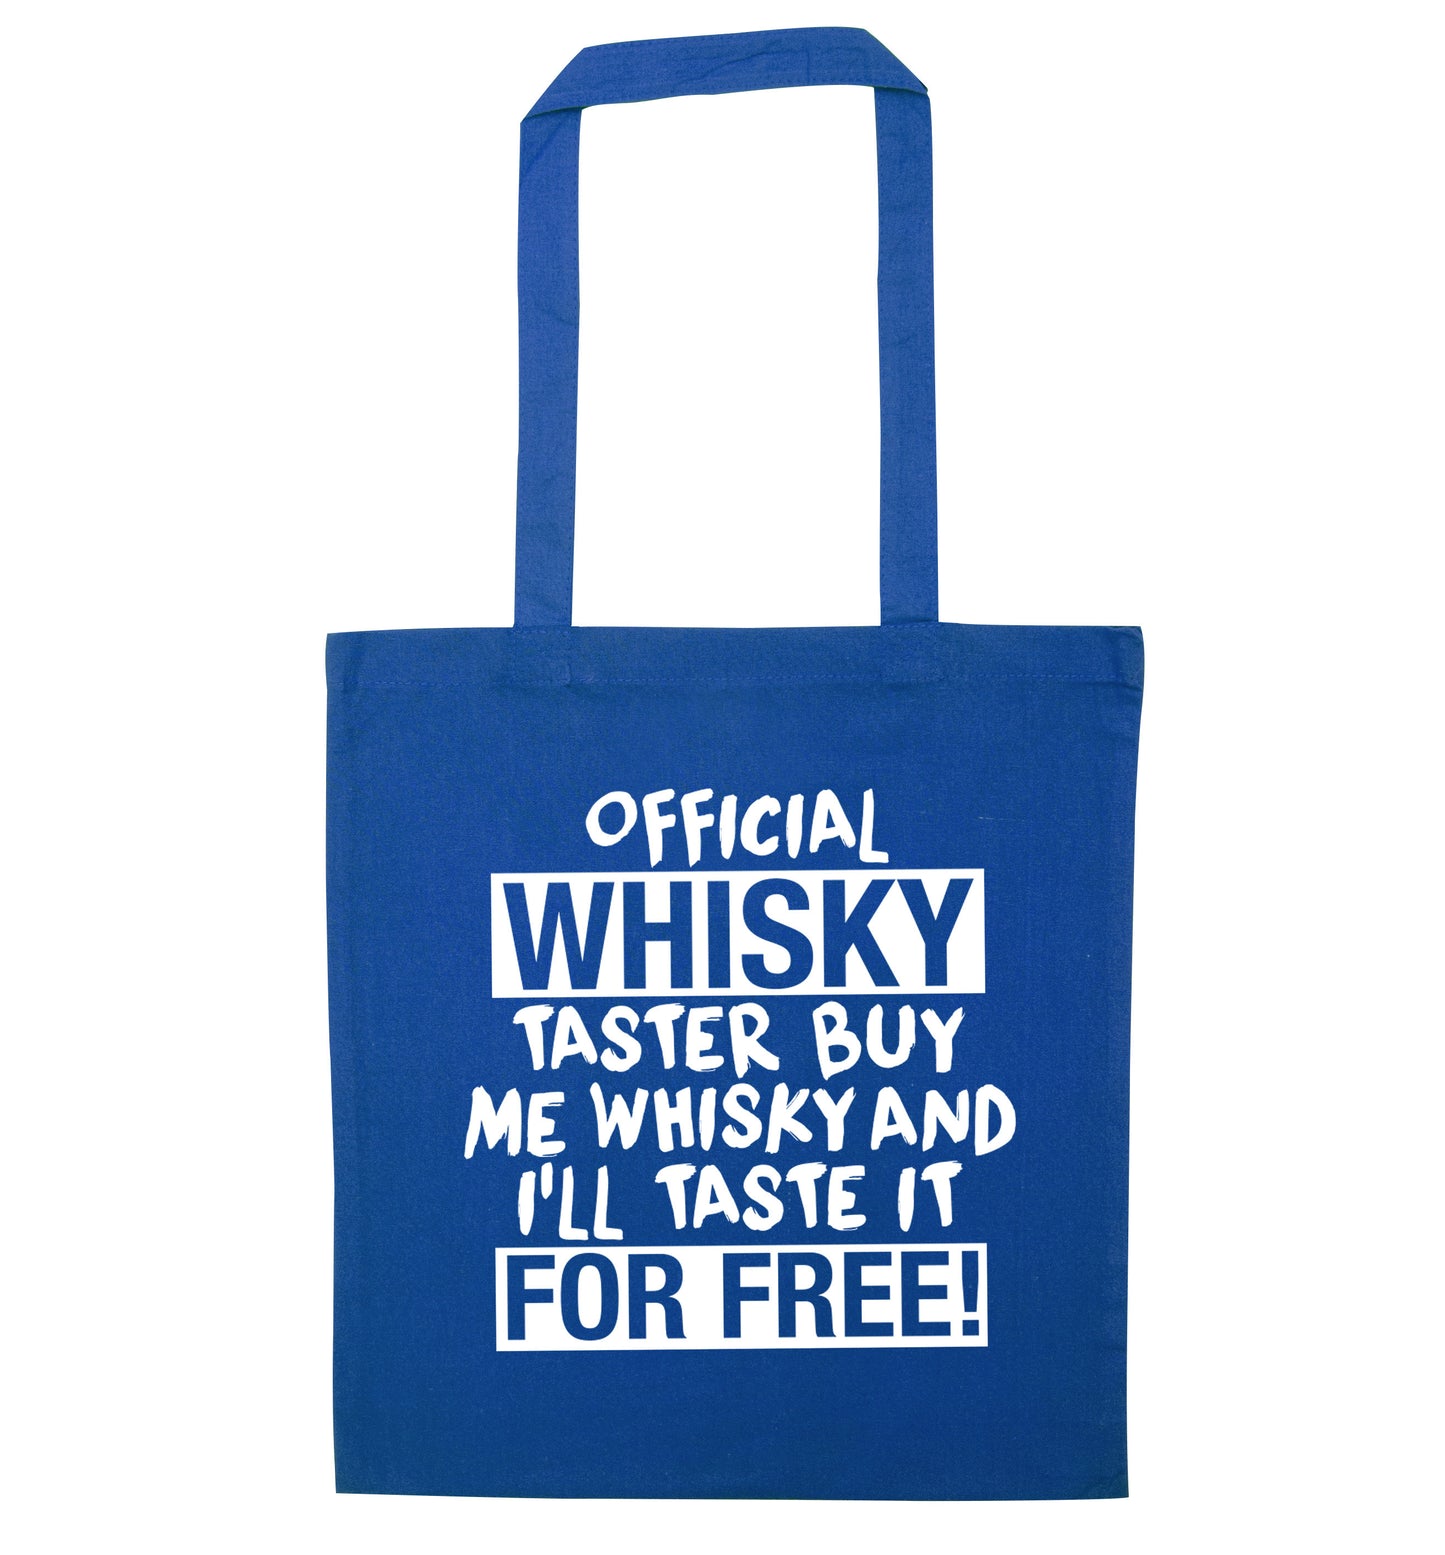 Official whisky taster buy me whisky and I'll taste it for free blue tote bag